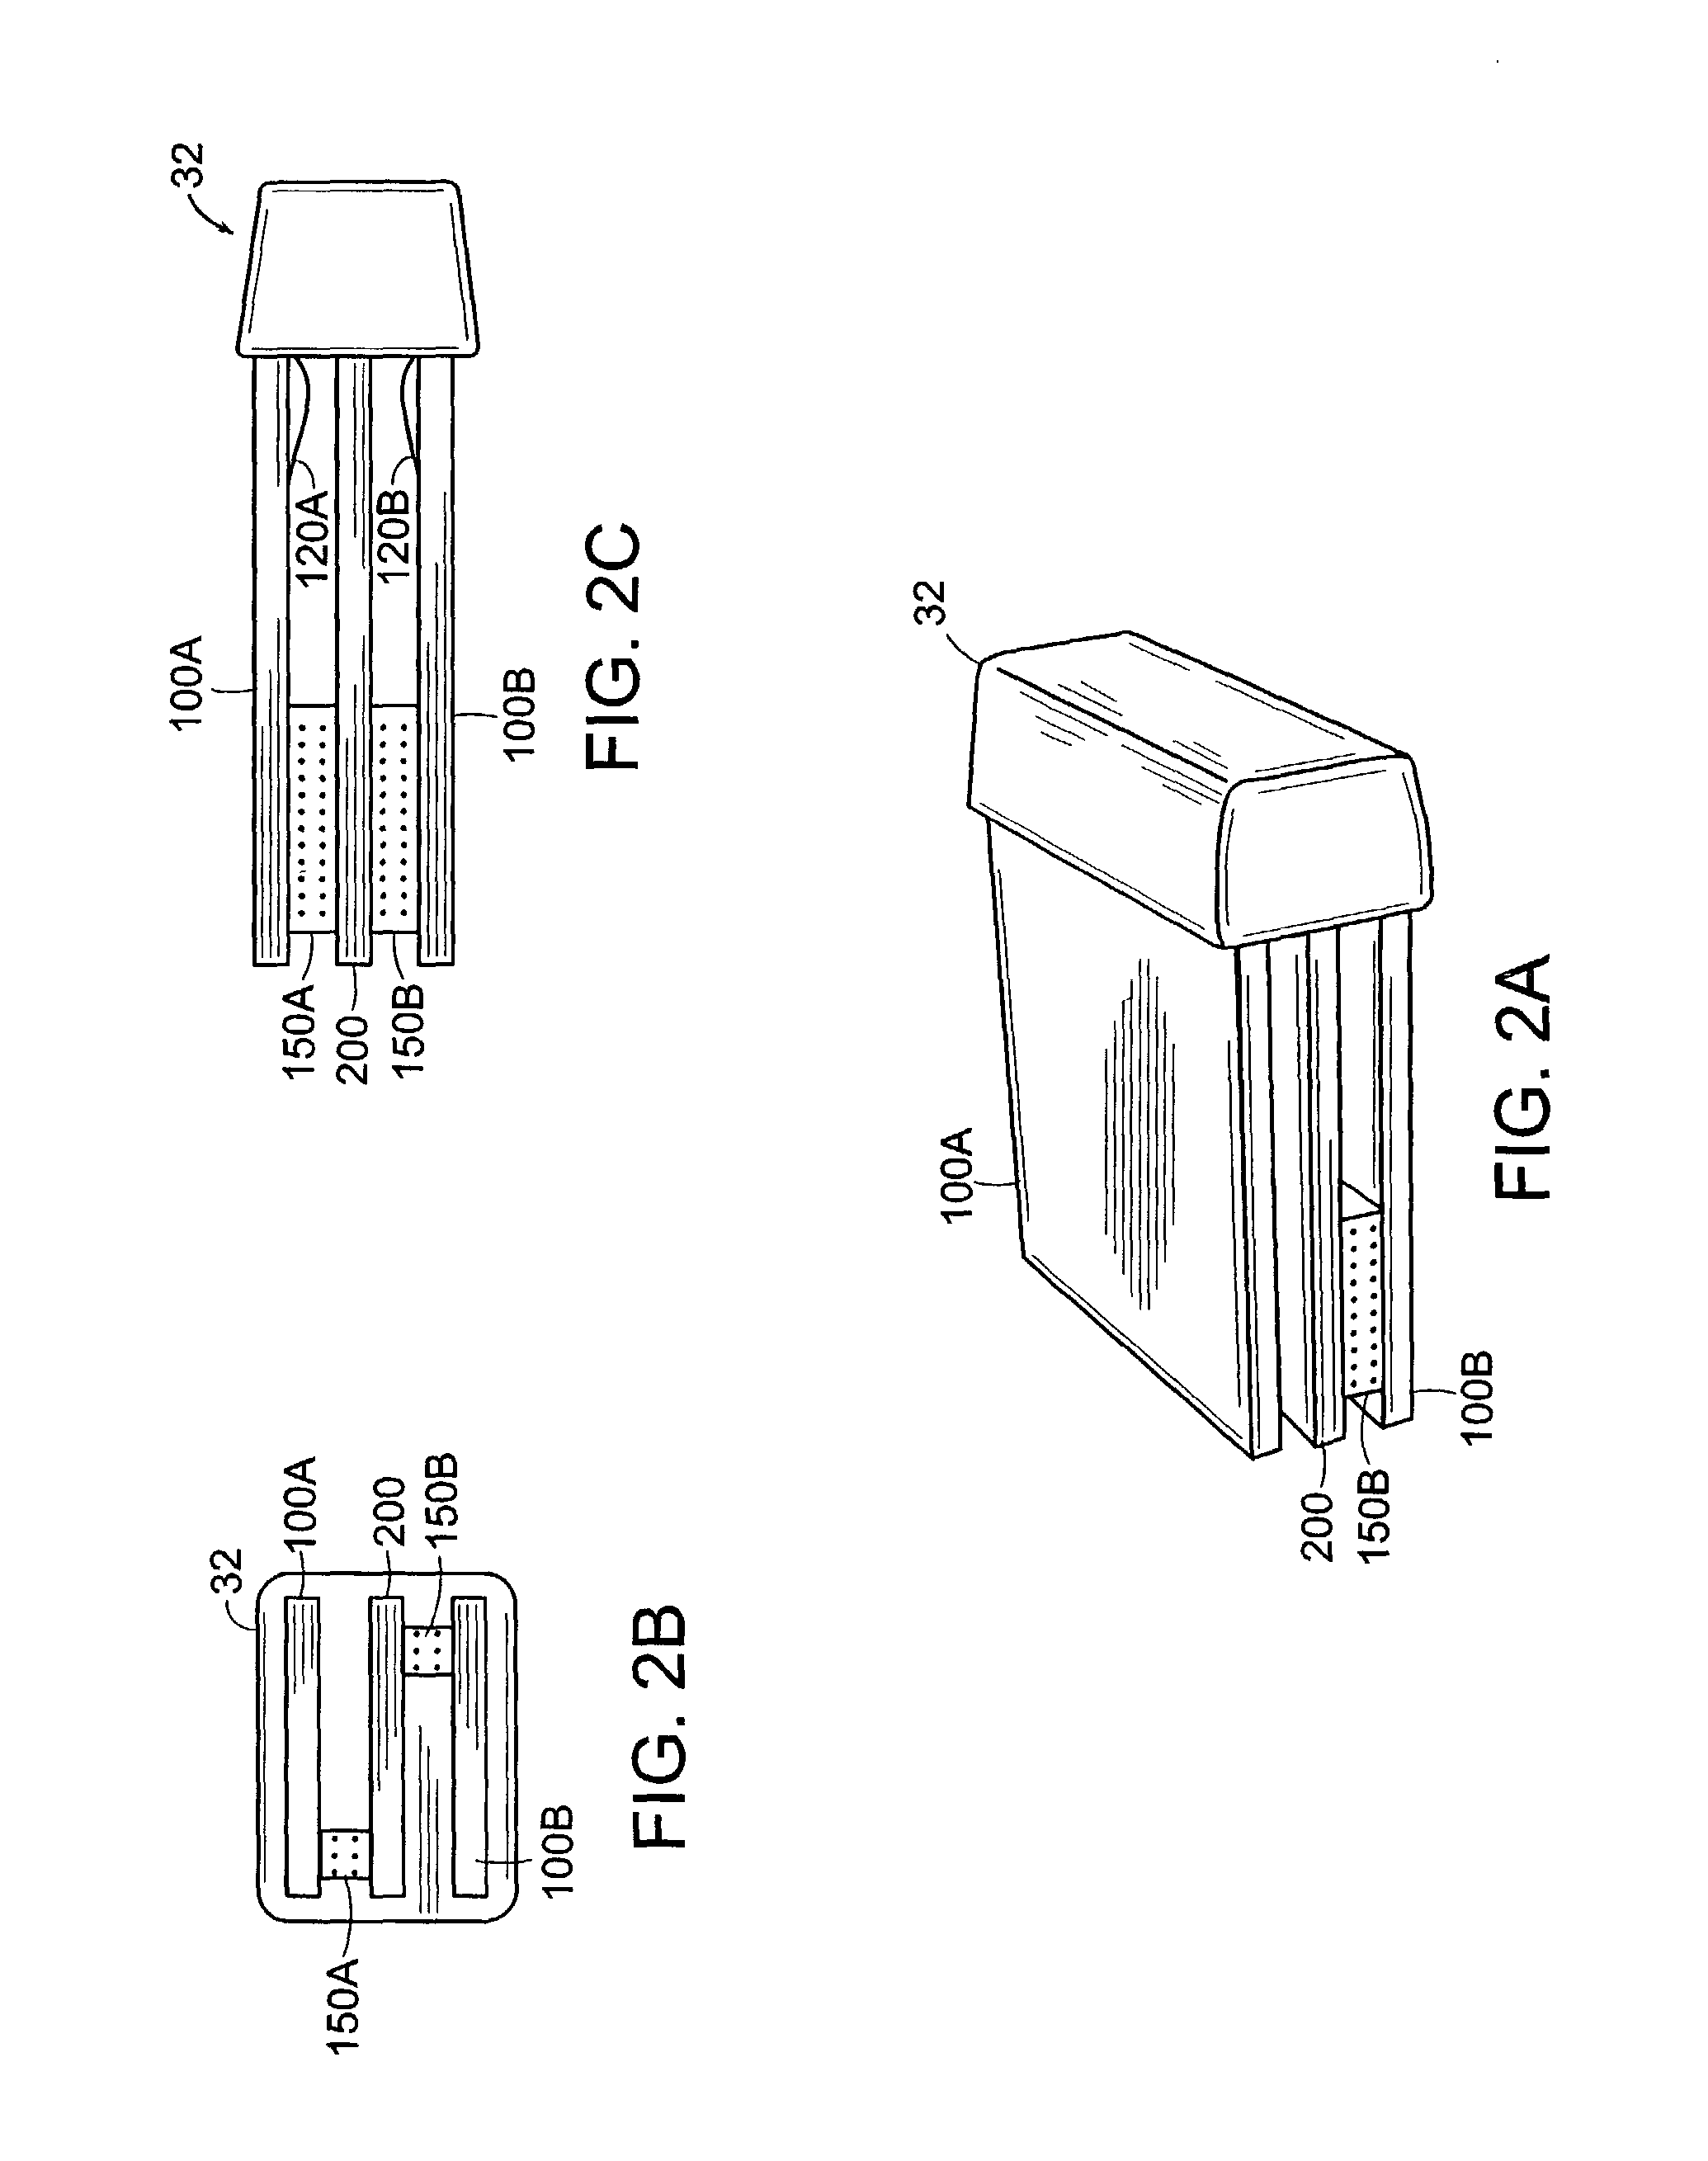 Methods for controlling an ultrasound imaging procedure and providing ultrasound images to an external non-ultrasound application via a network